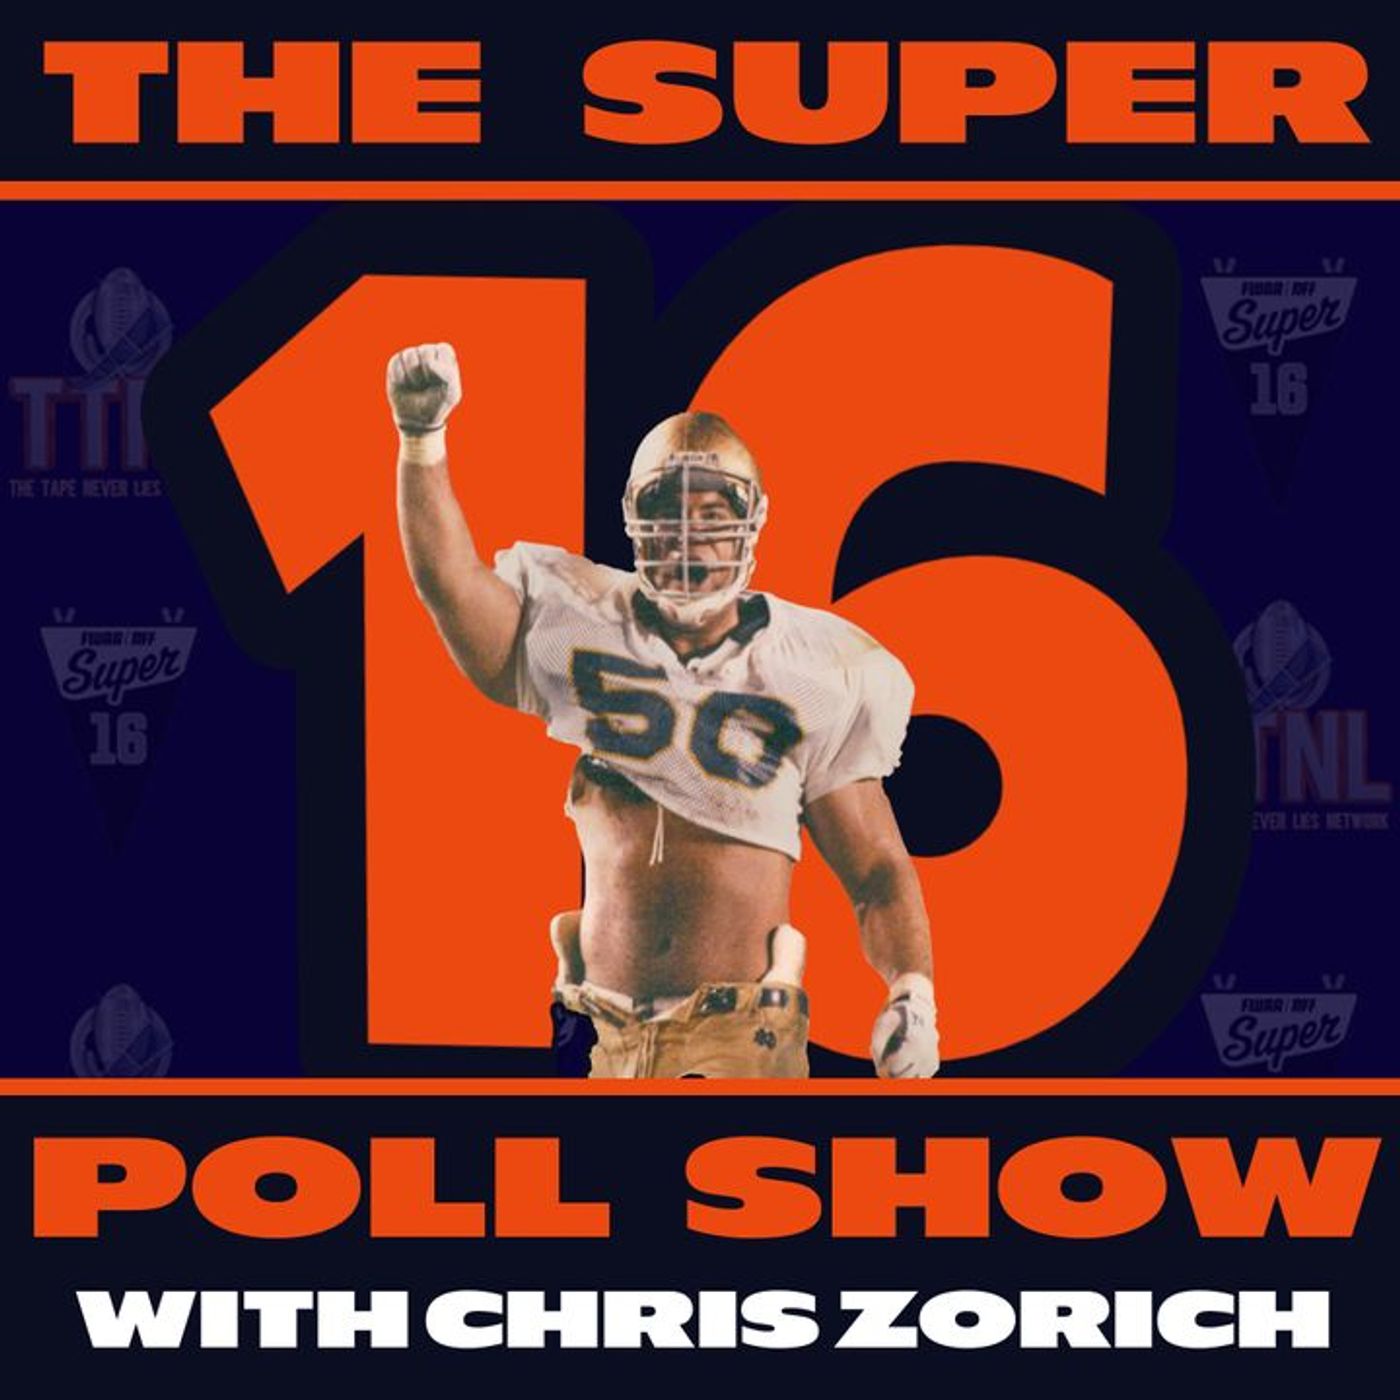 The Super 16 Championship Post Game Show with Chris Zorich